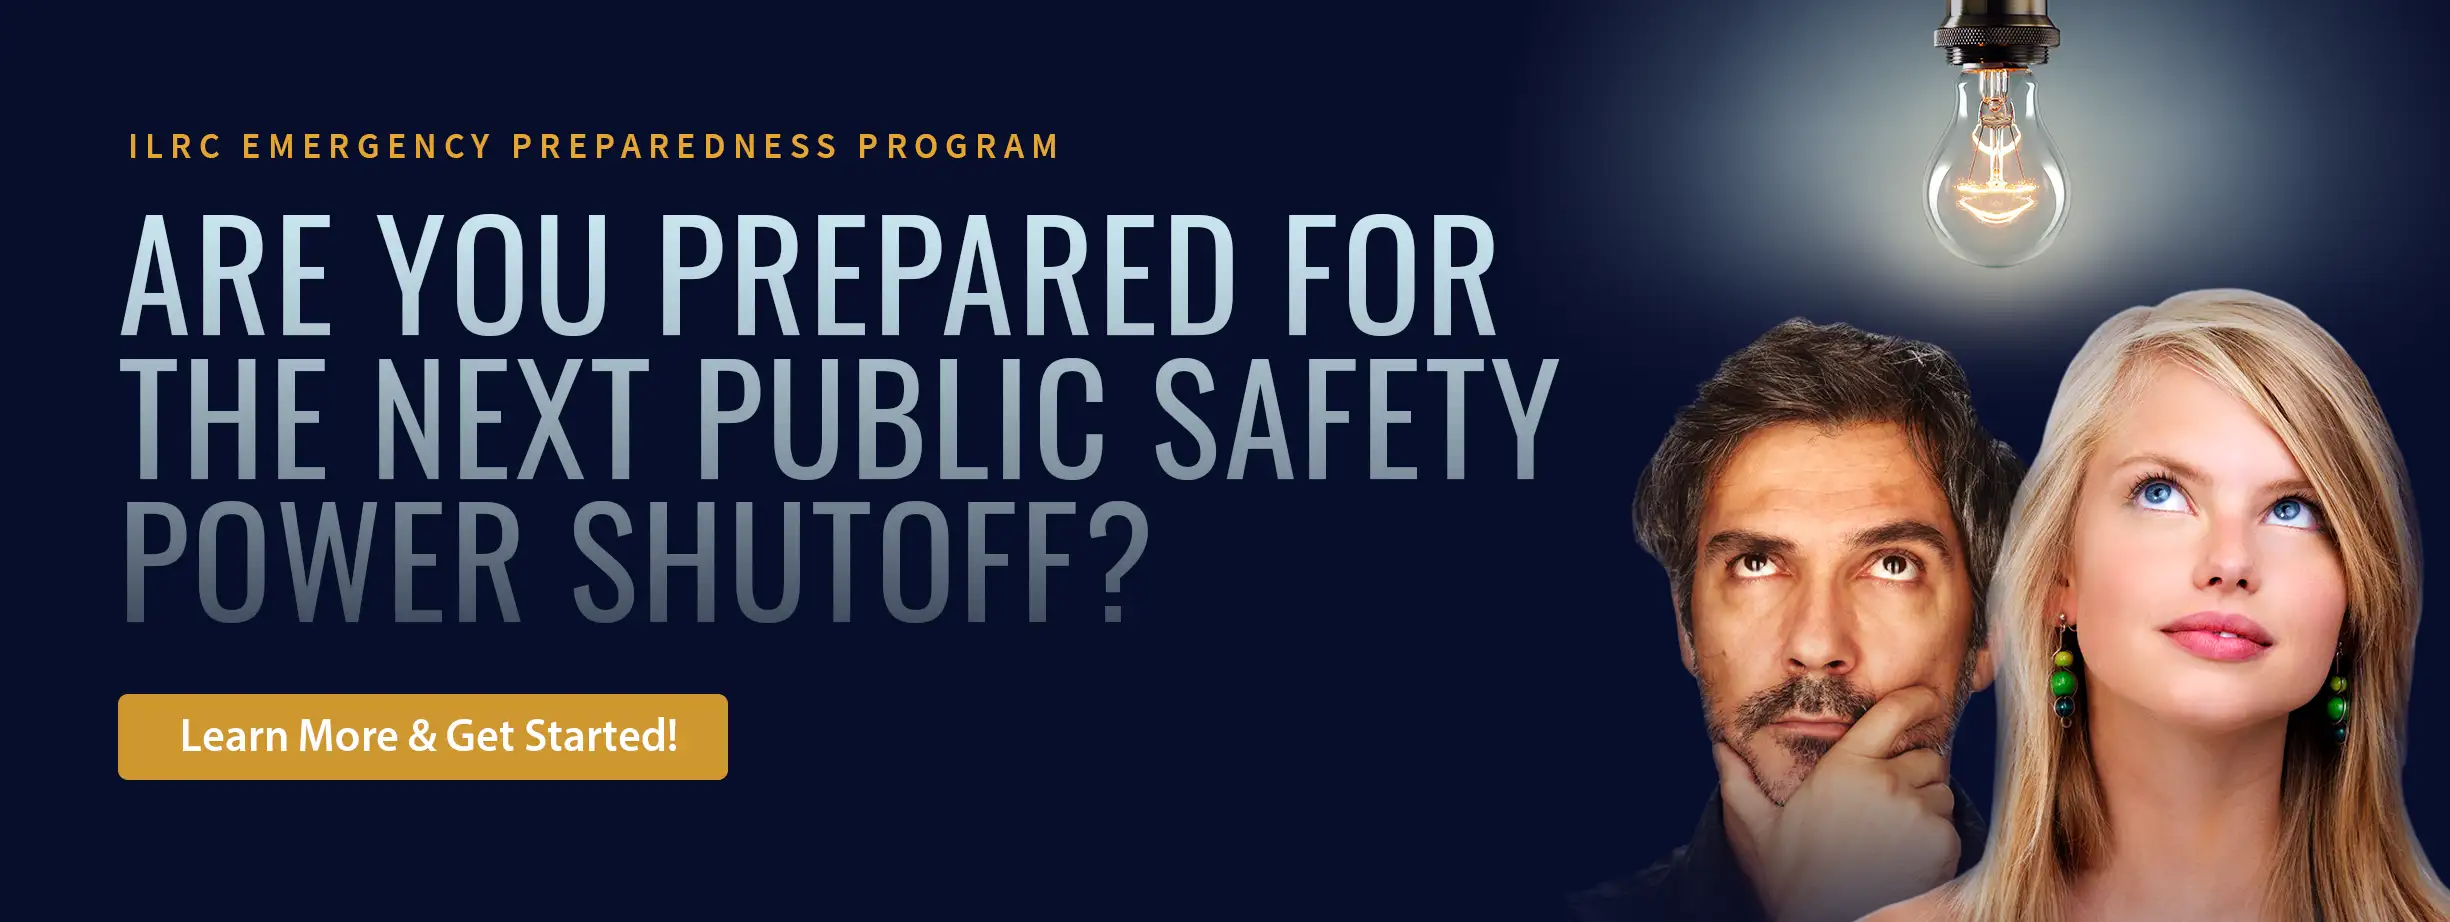 ILRC Emergency Preparedness Program – Are you prepared for the next public safety power shutoff? Learn more and get started!